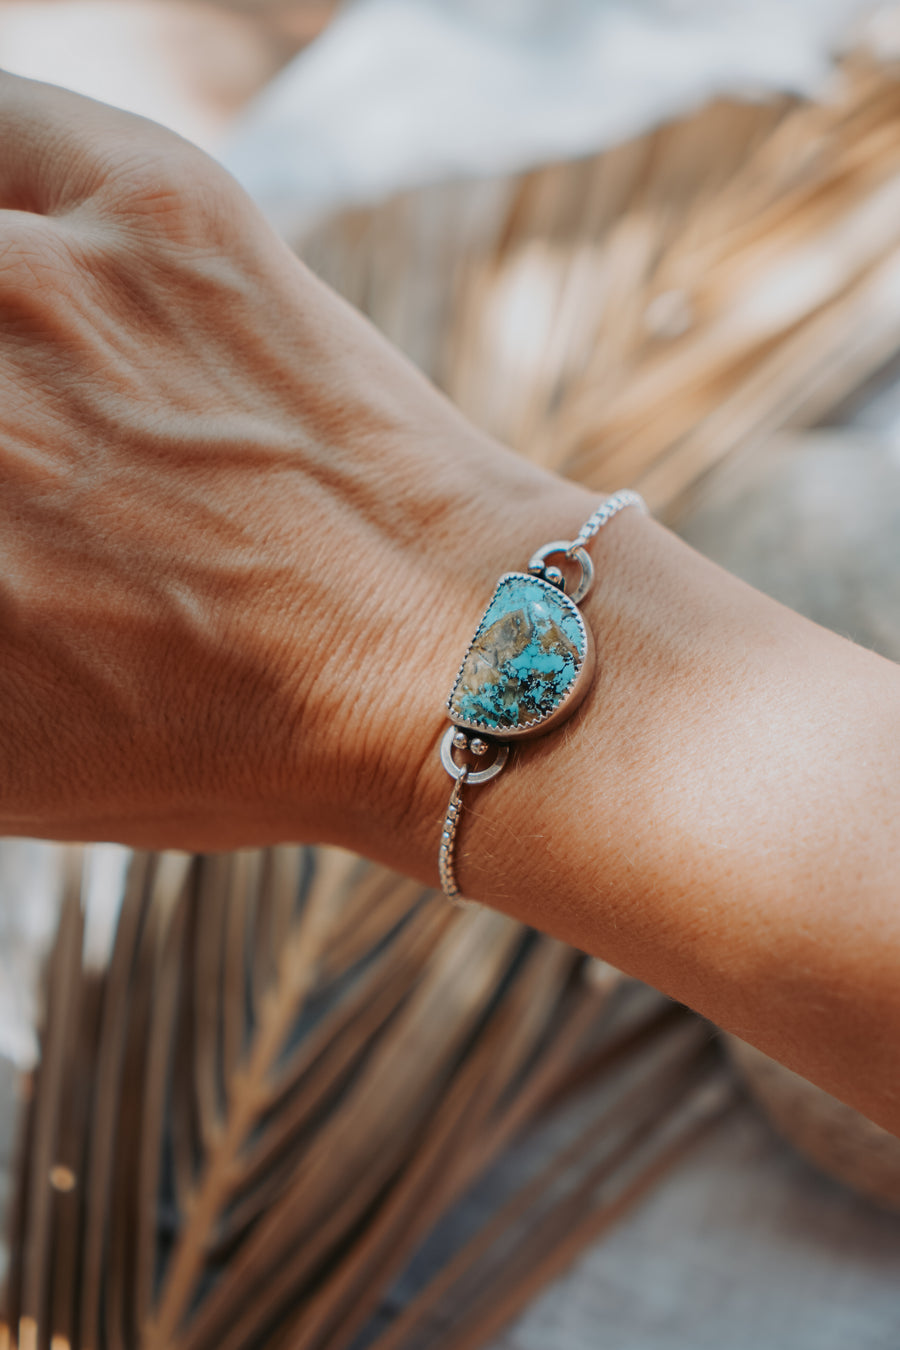 Out West Adjustable Bracelets in Sandhill Turquoise